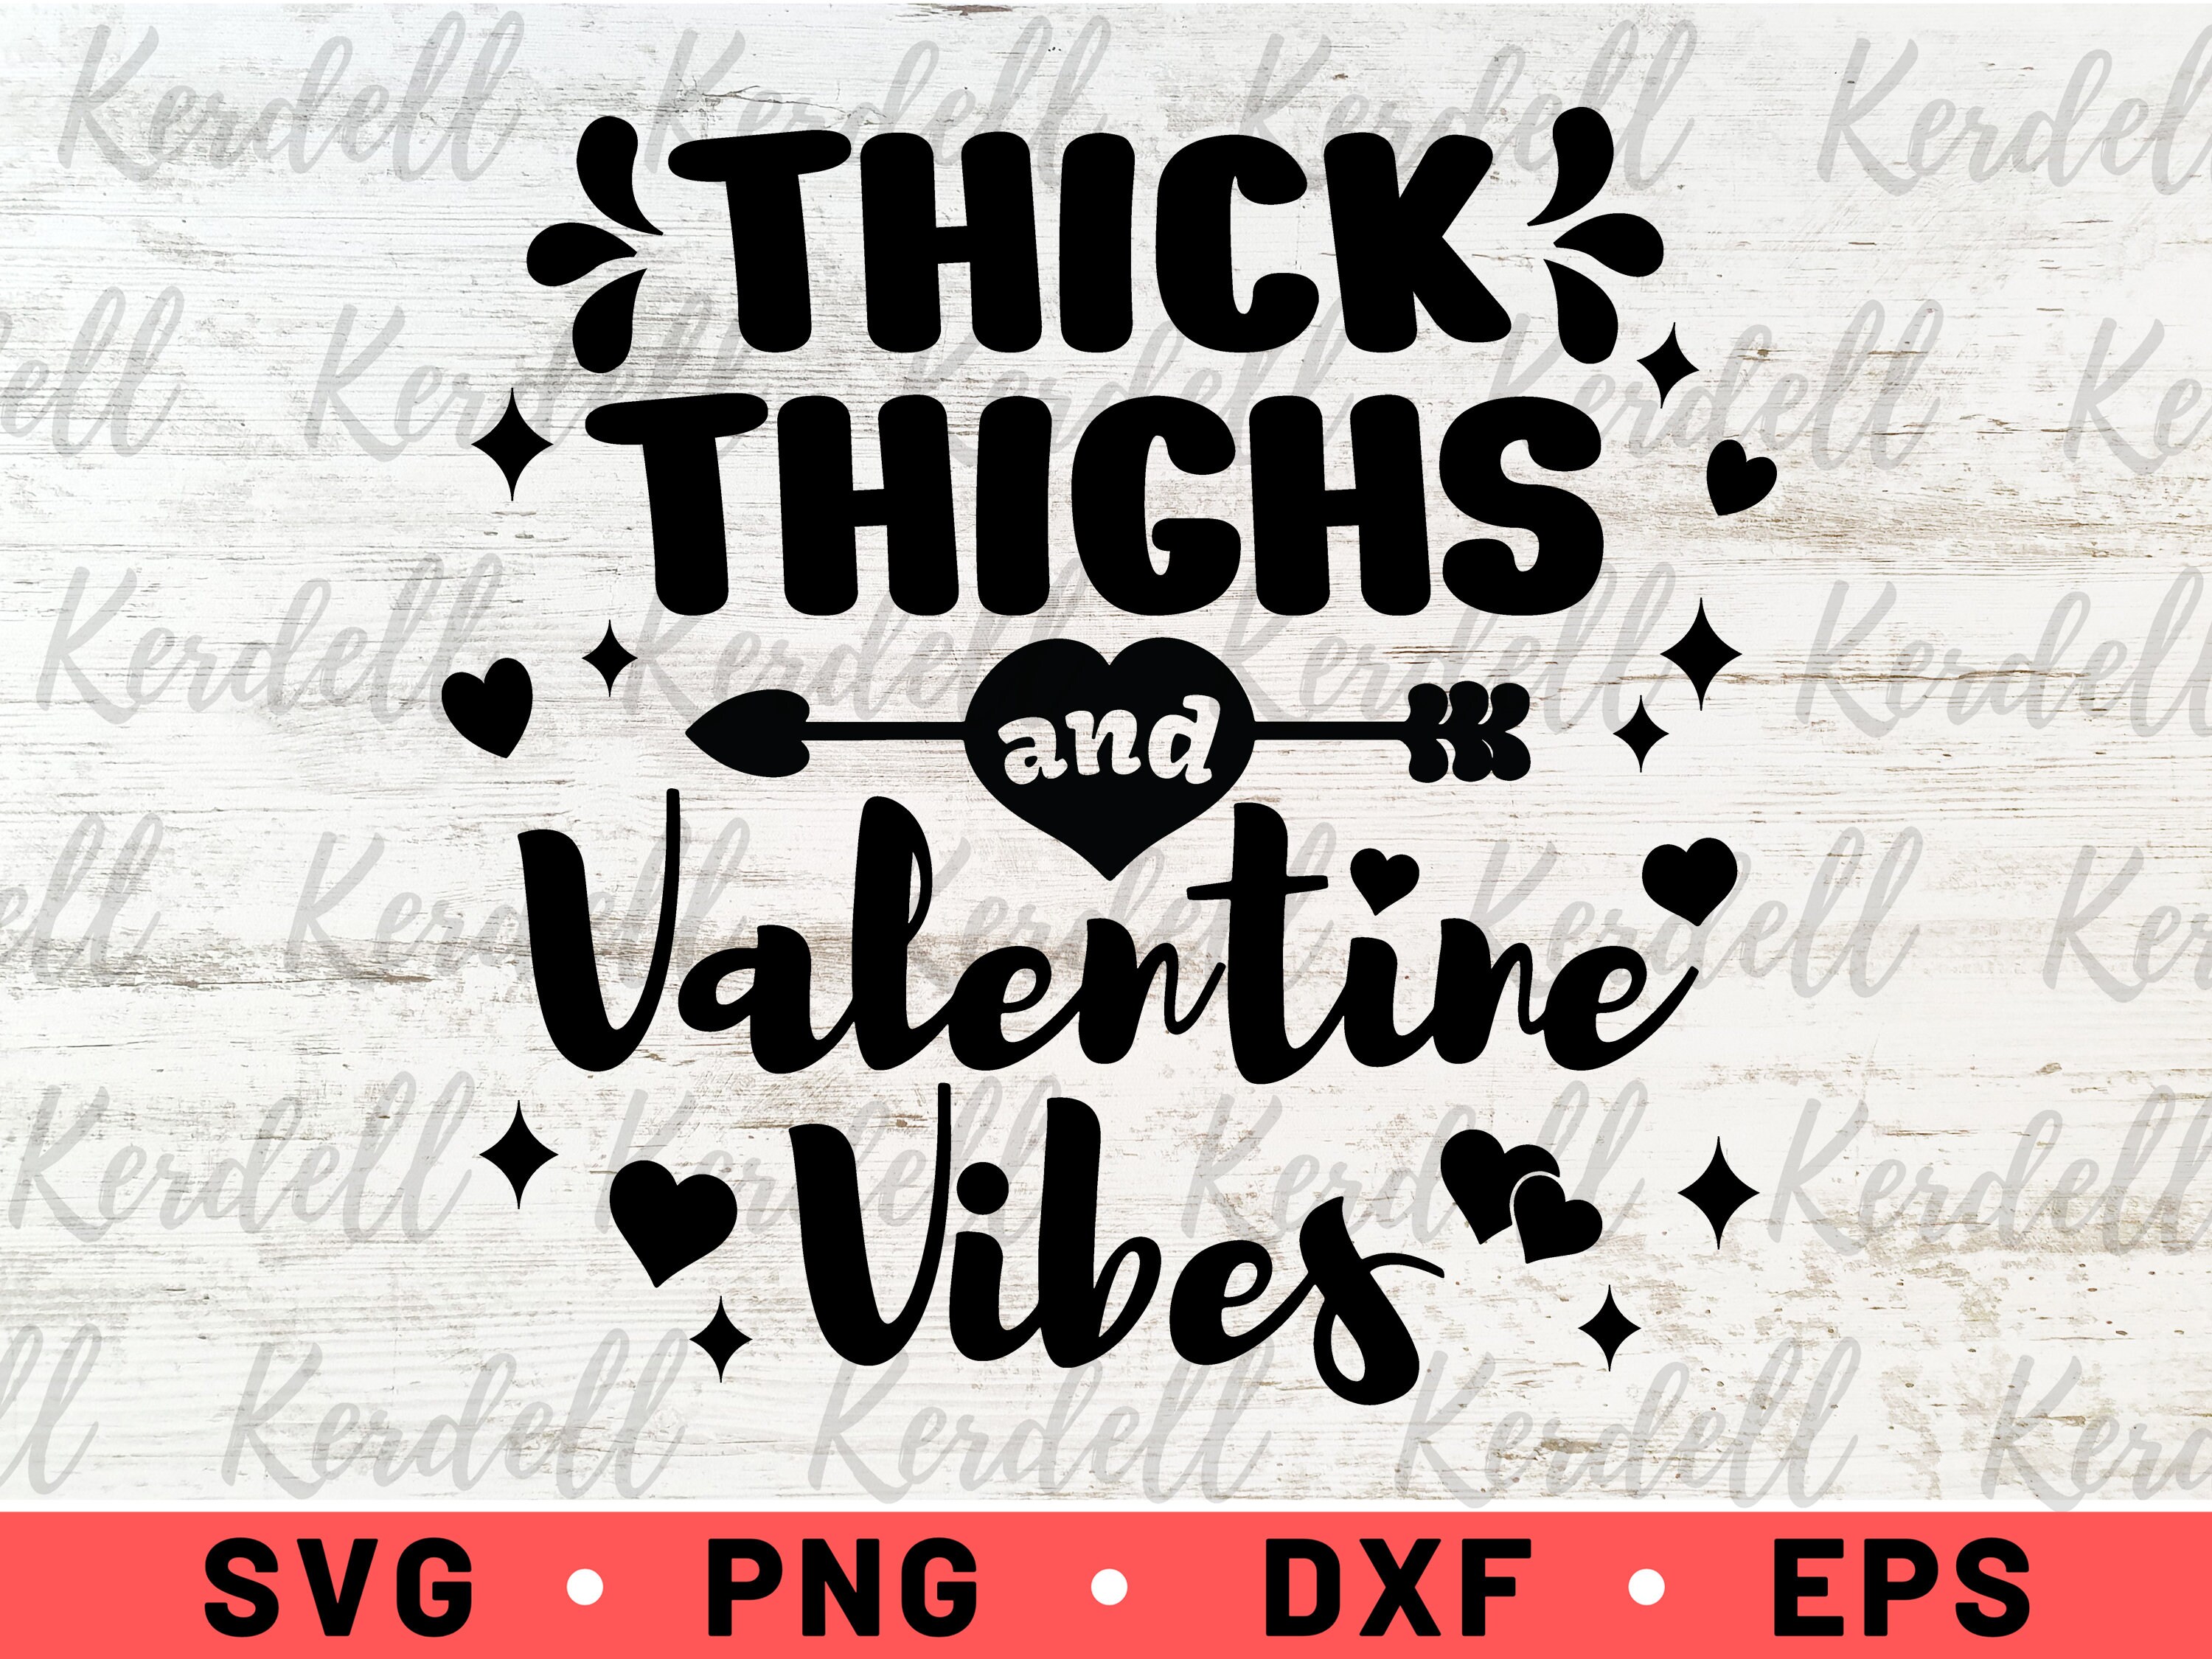 Love Vibes Svg Sublimation Designs Funny Valentine Svg Valentines Day Svg Thick Thighs Valentine Vibes Svg Svg files Cricut Love Vibes